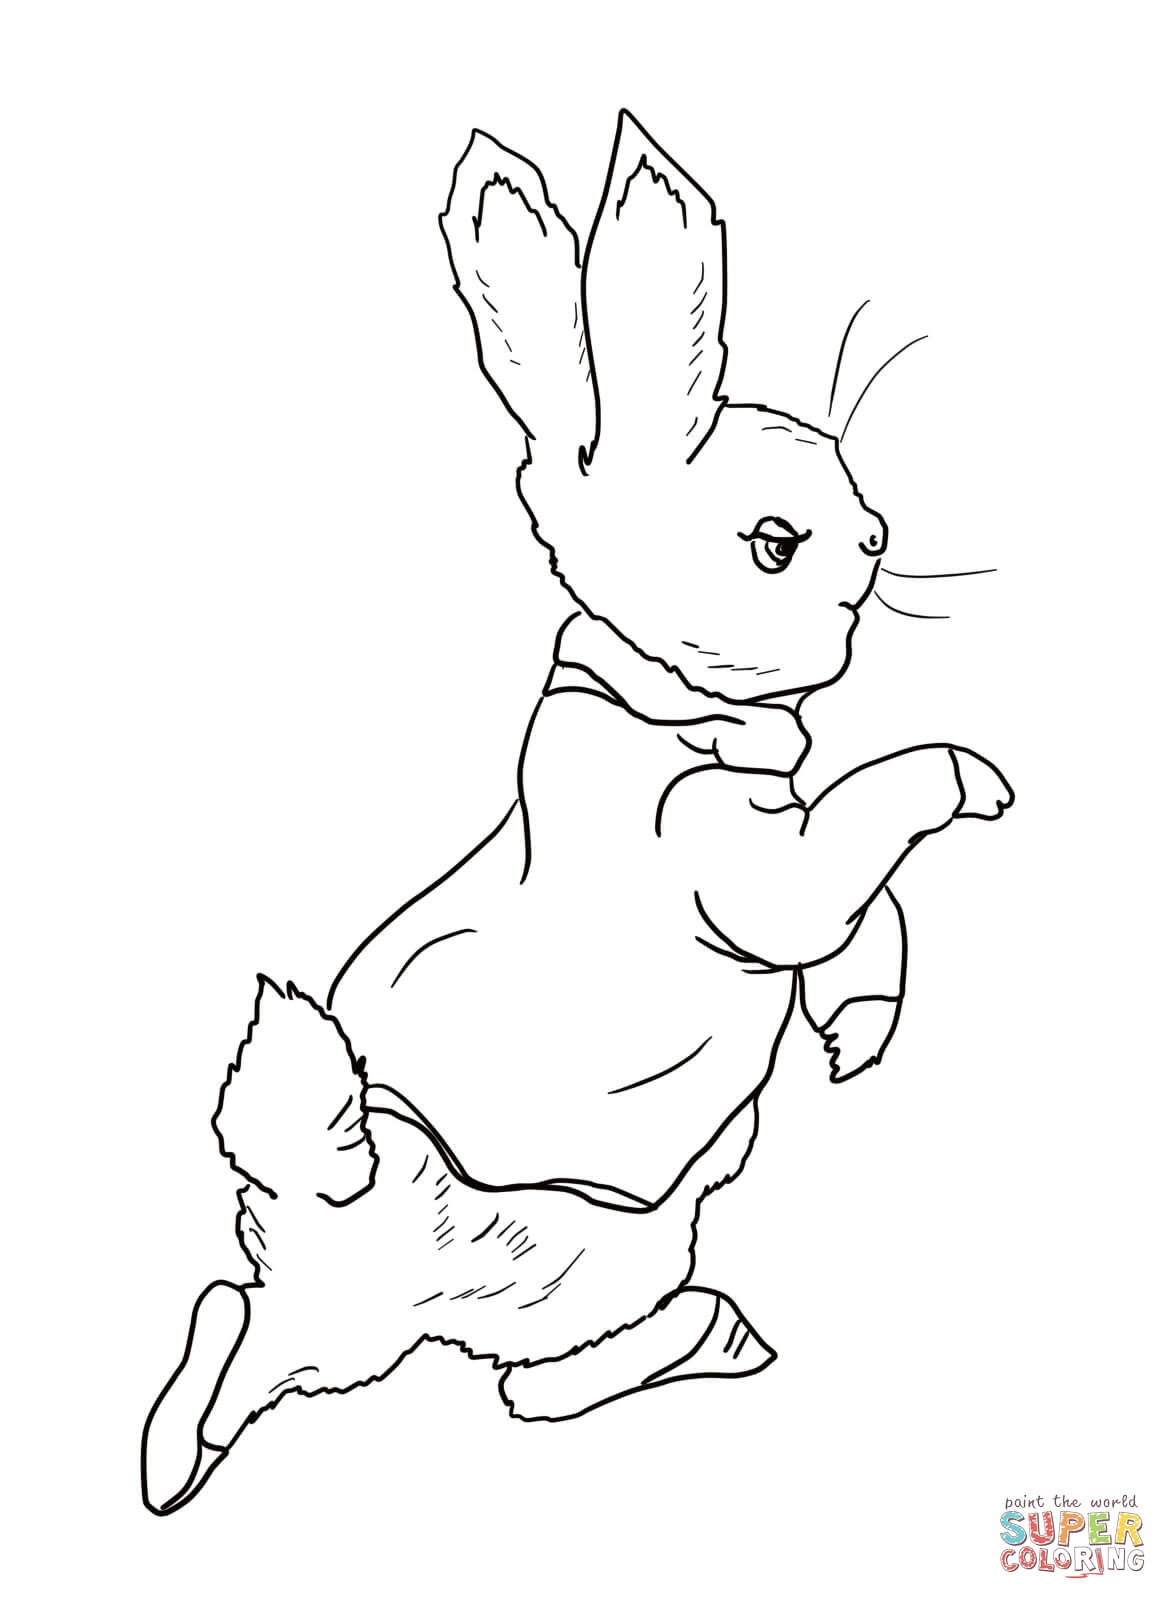 Peter Rabbit Coloring Pages | Free Coloring Pages - Free Printable Peter Rabbit Coloring Pages